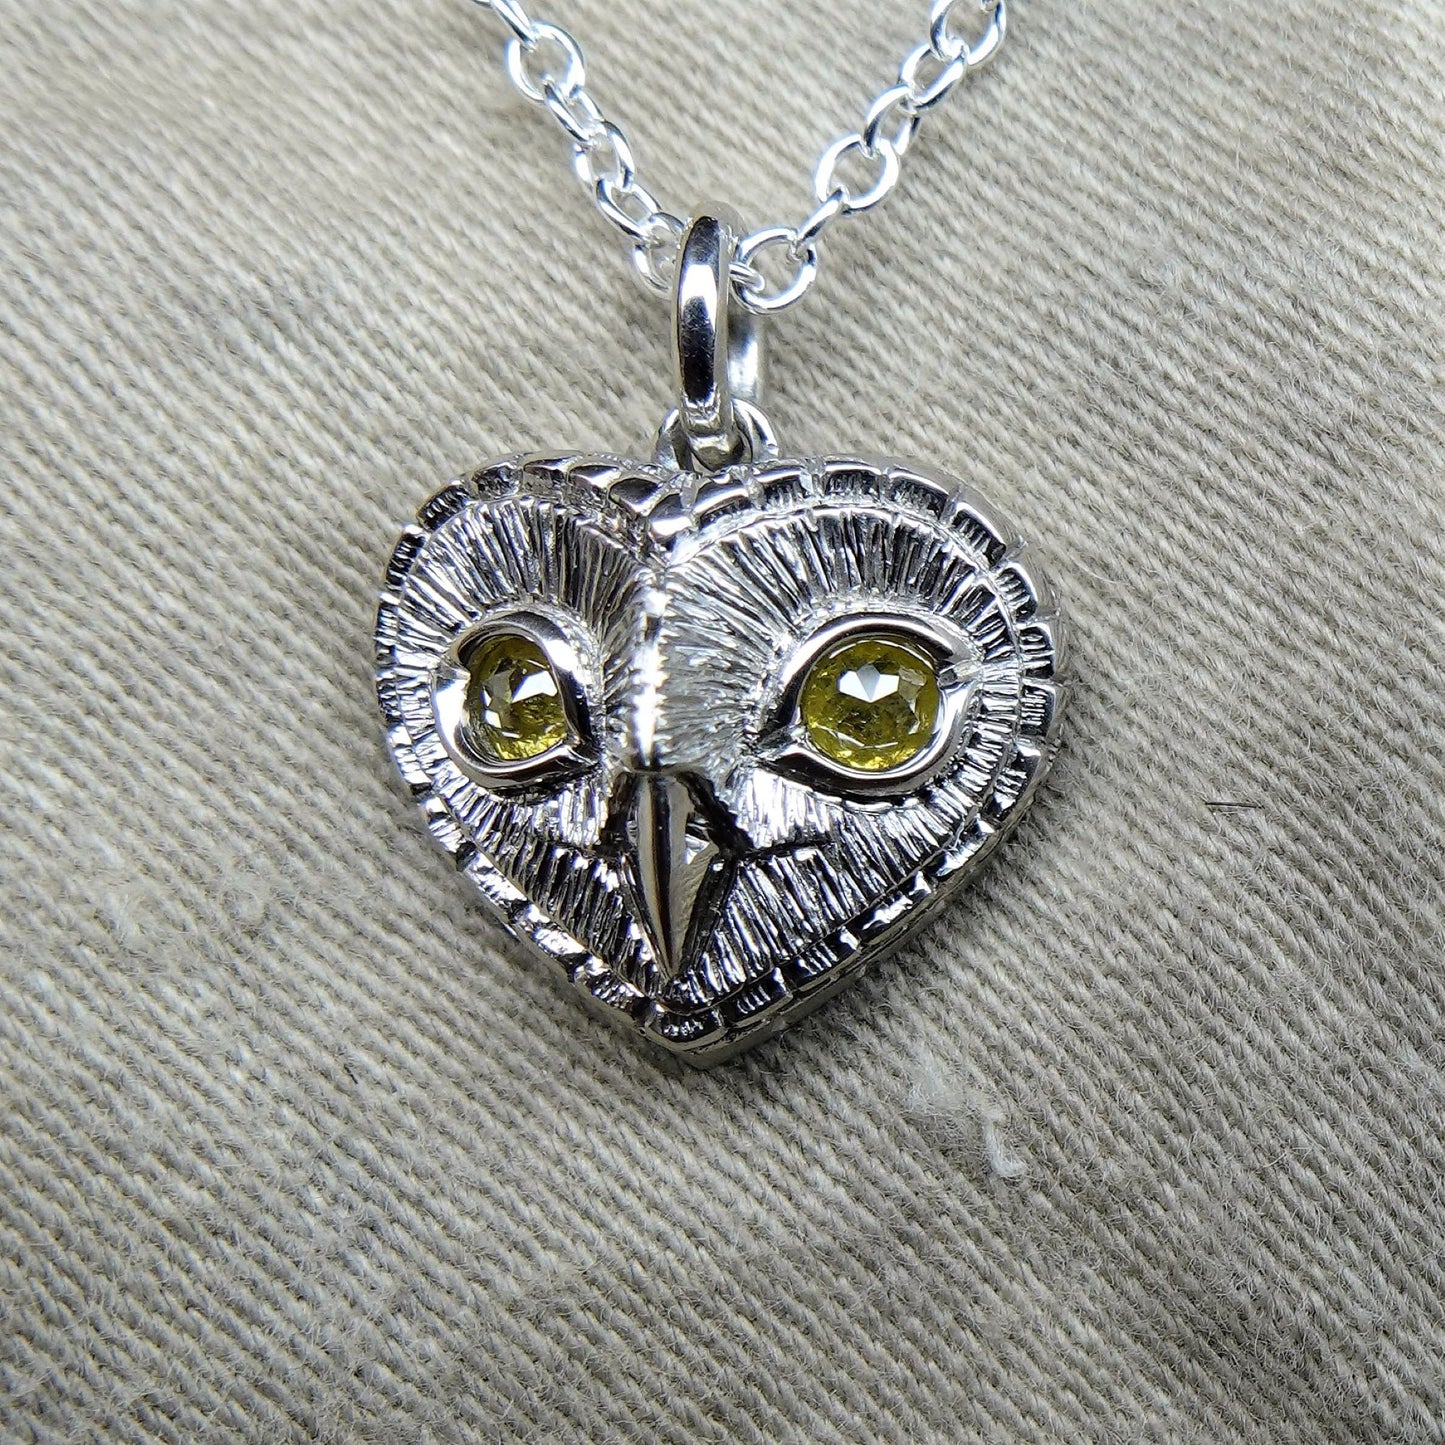 Diamond owl necklace. Platinum coated sterling silver heart shaped owl head pendant with natural, rose cut, diamond eyes © Adrian Ashley